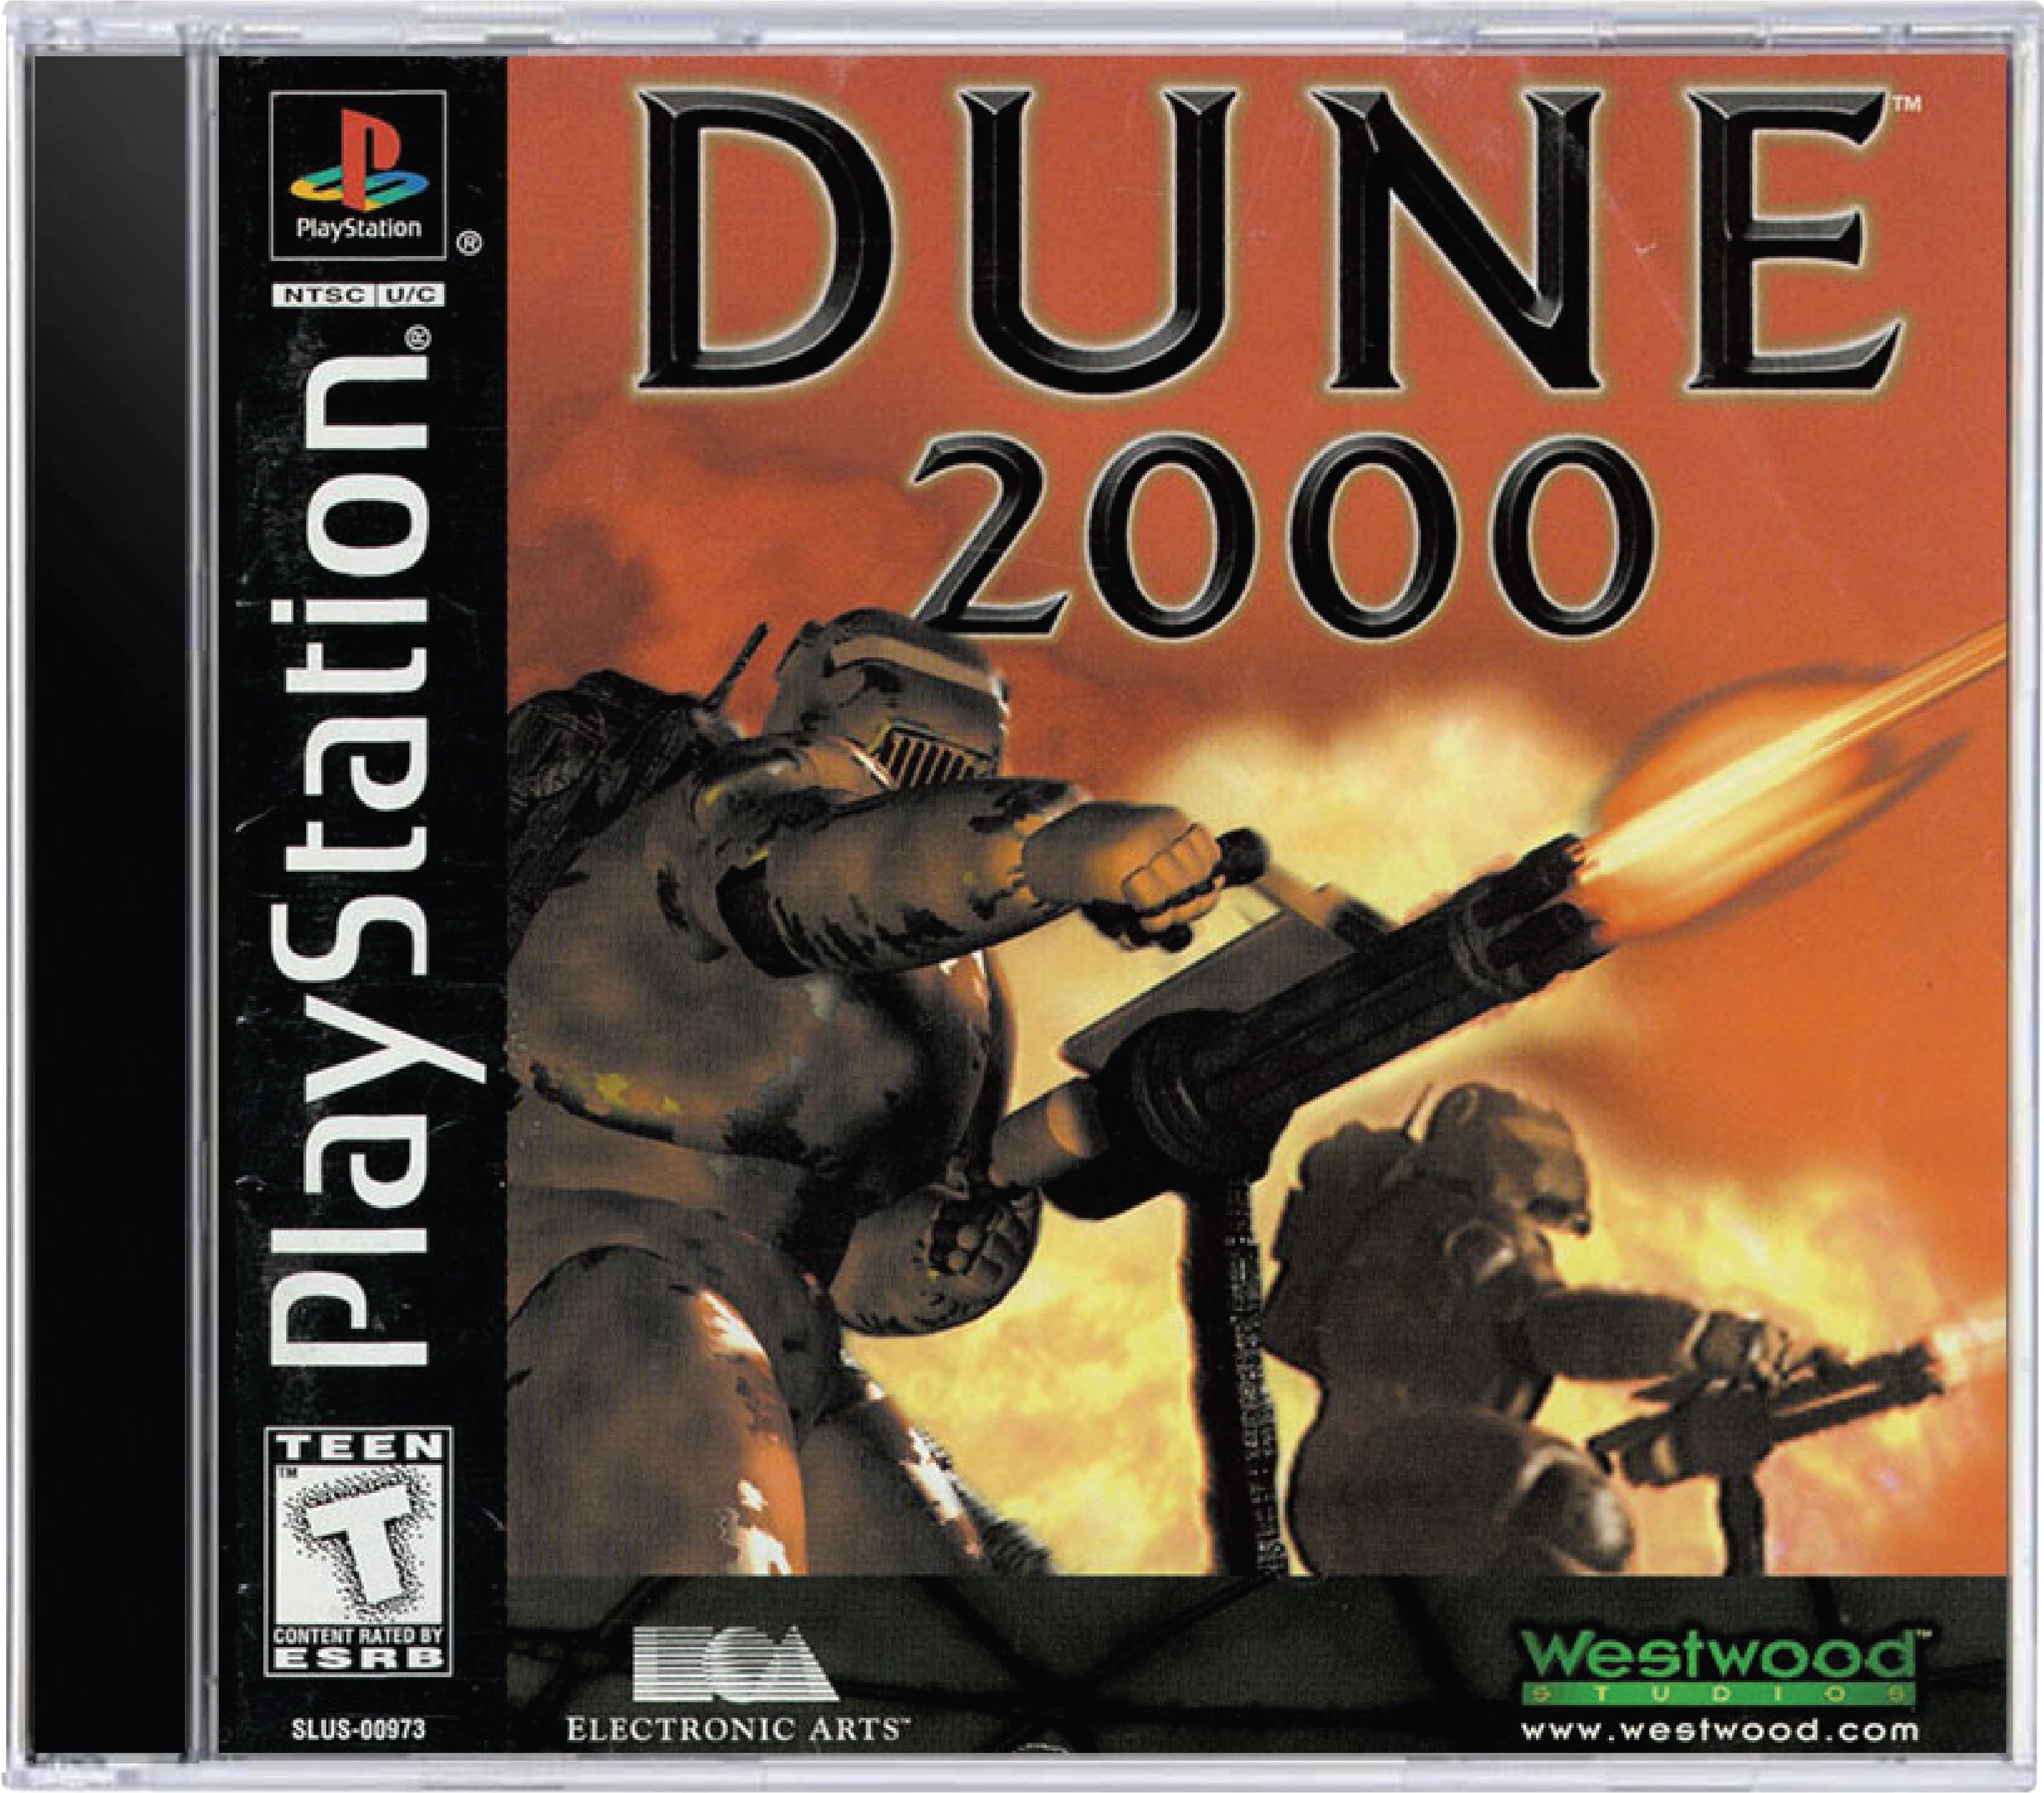 Dune 2000 Cover Art and Product Photo